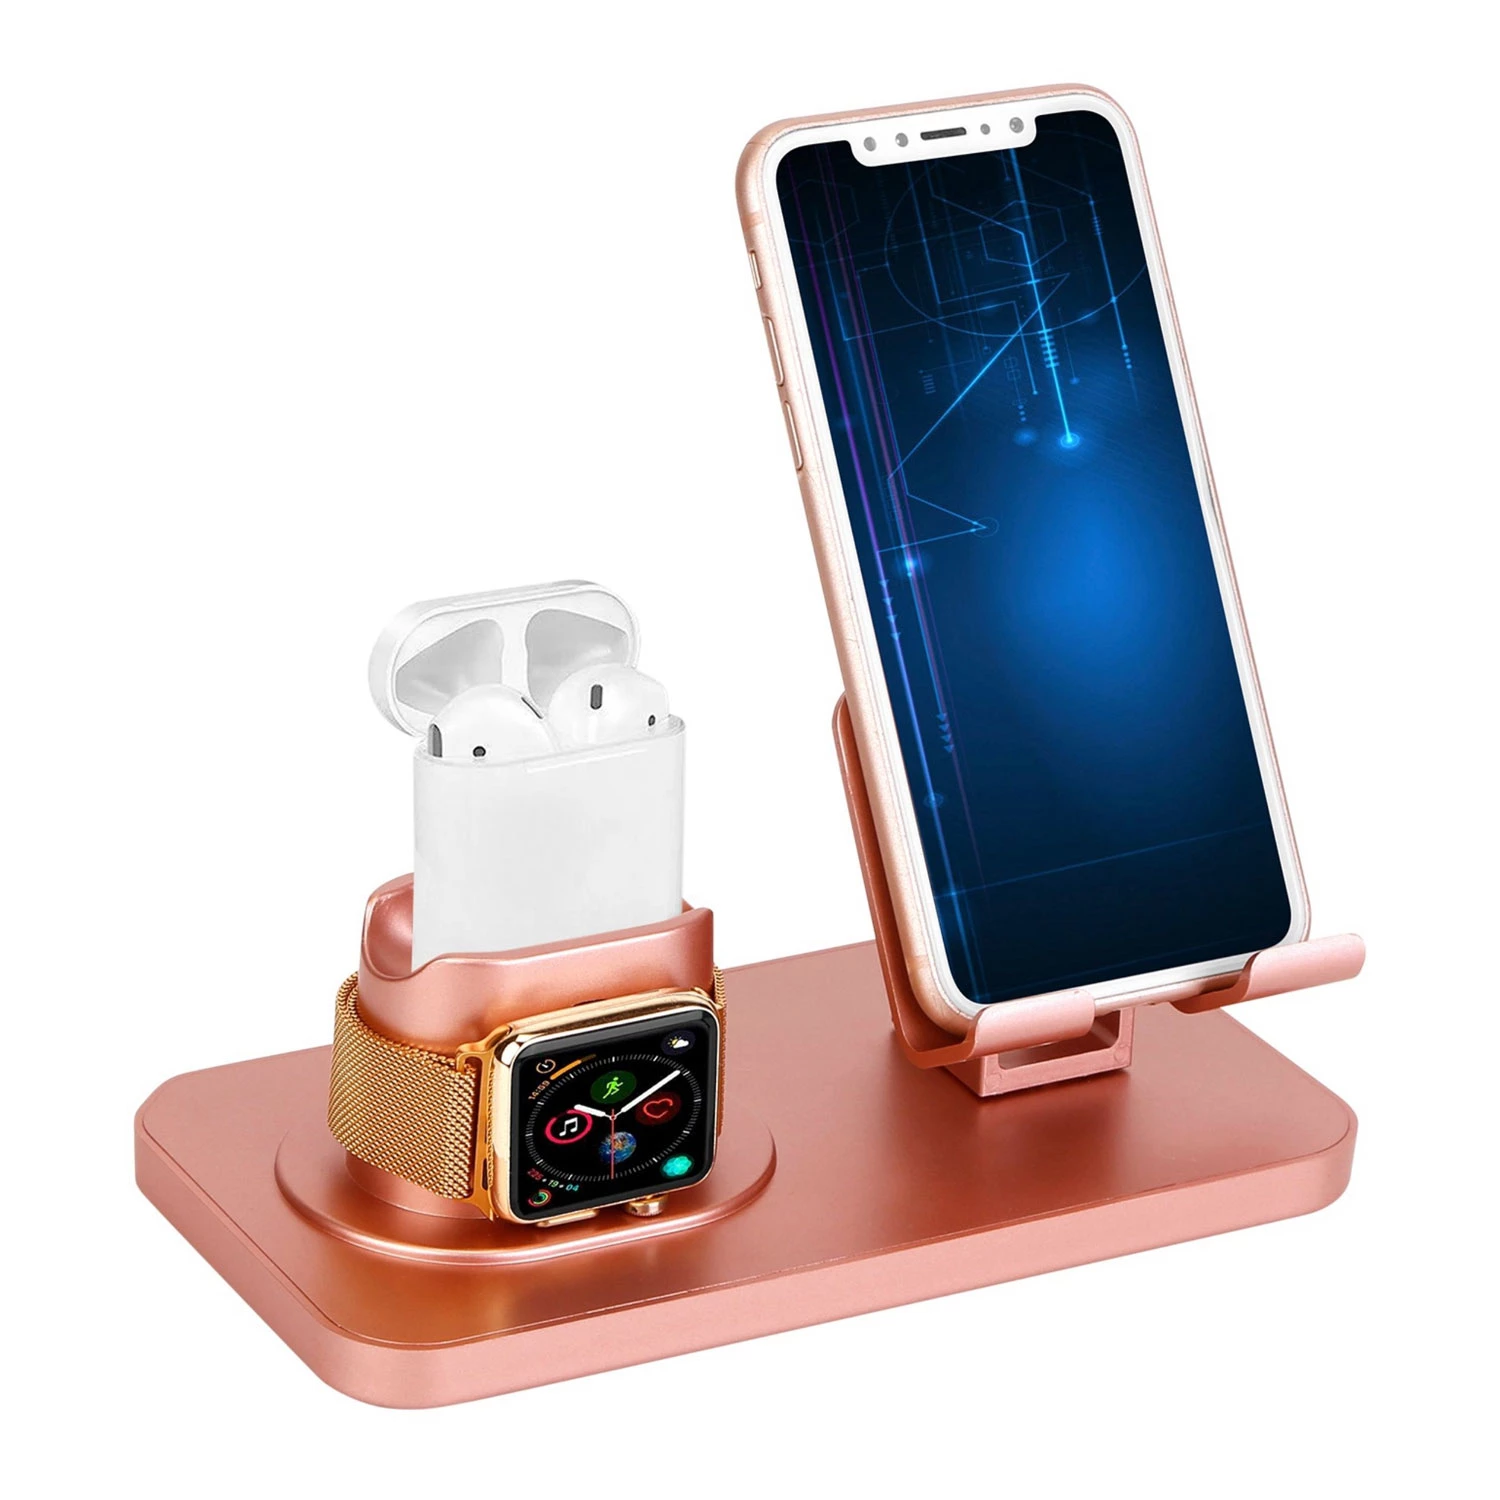 3-in-1 Charging Dock for Apple Watch, iPhone And AirPods